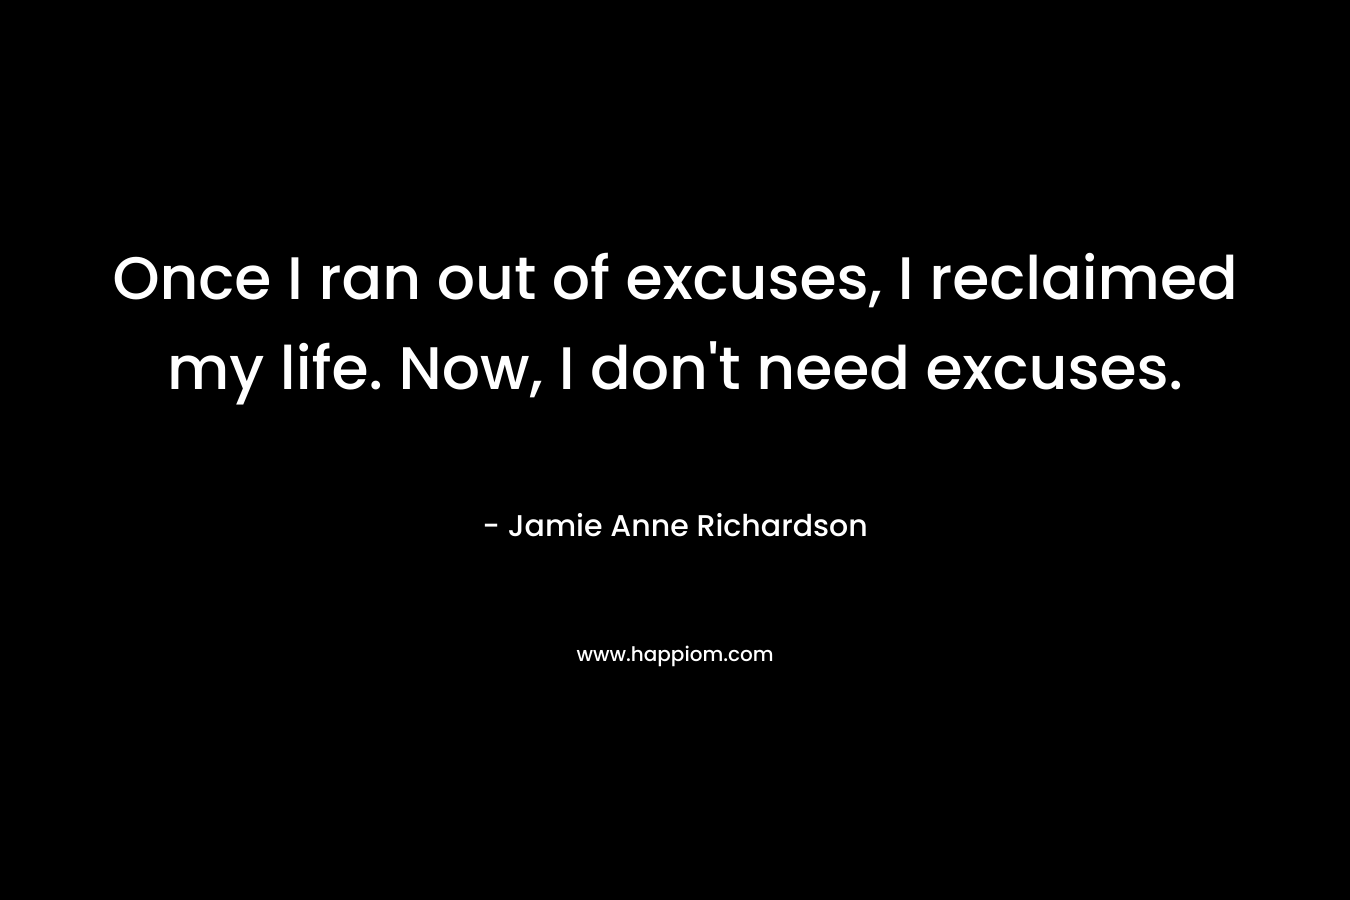 Once I ran out of excuses, I reclaimed my life. Now, I don’t need excuses. – Jamie Anne Richardson